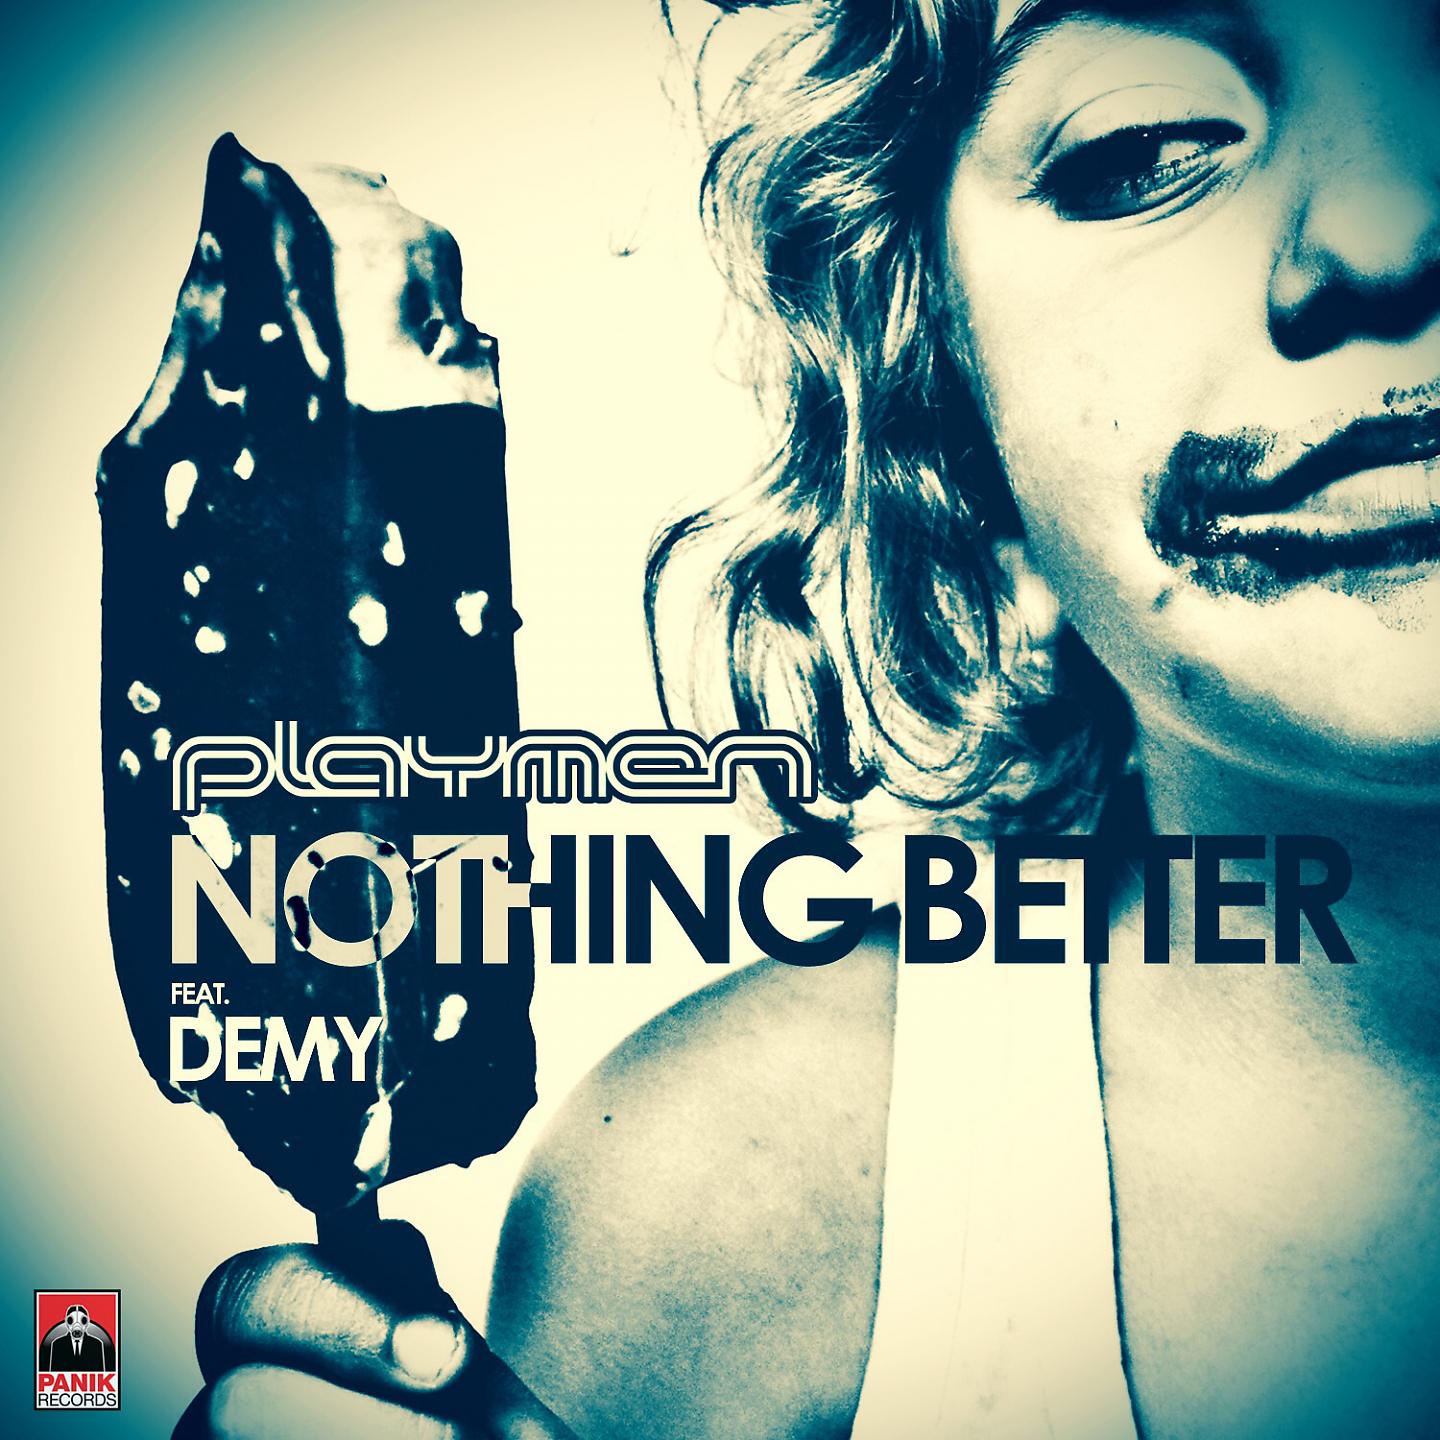 Better feat. Nothing better Playmen. Nothing better. Playmen feat. Demy картинки. Playmen feat. Demy кто это.